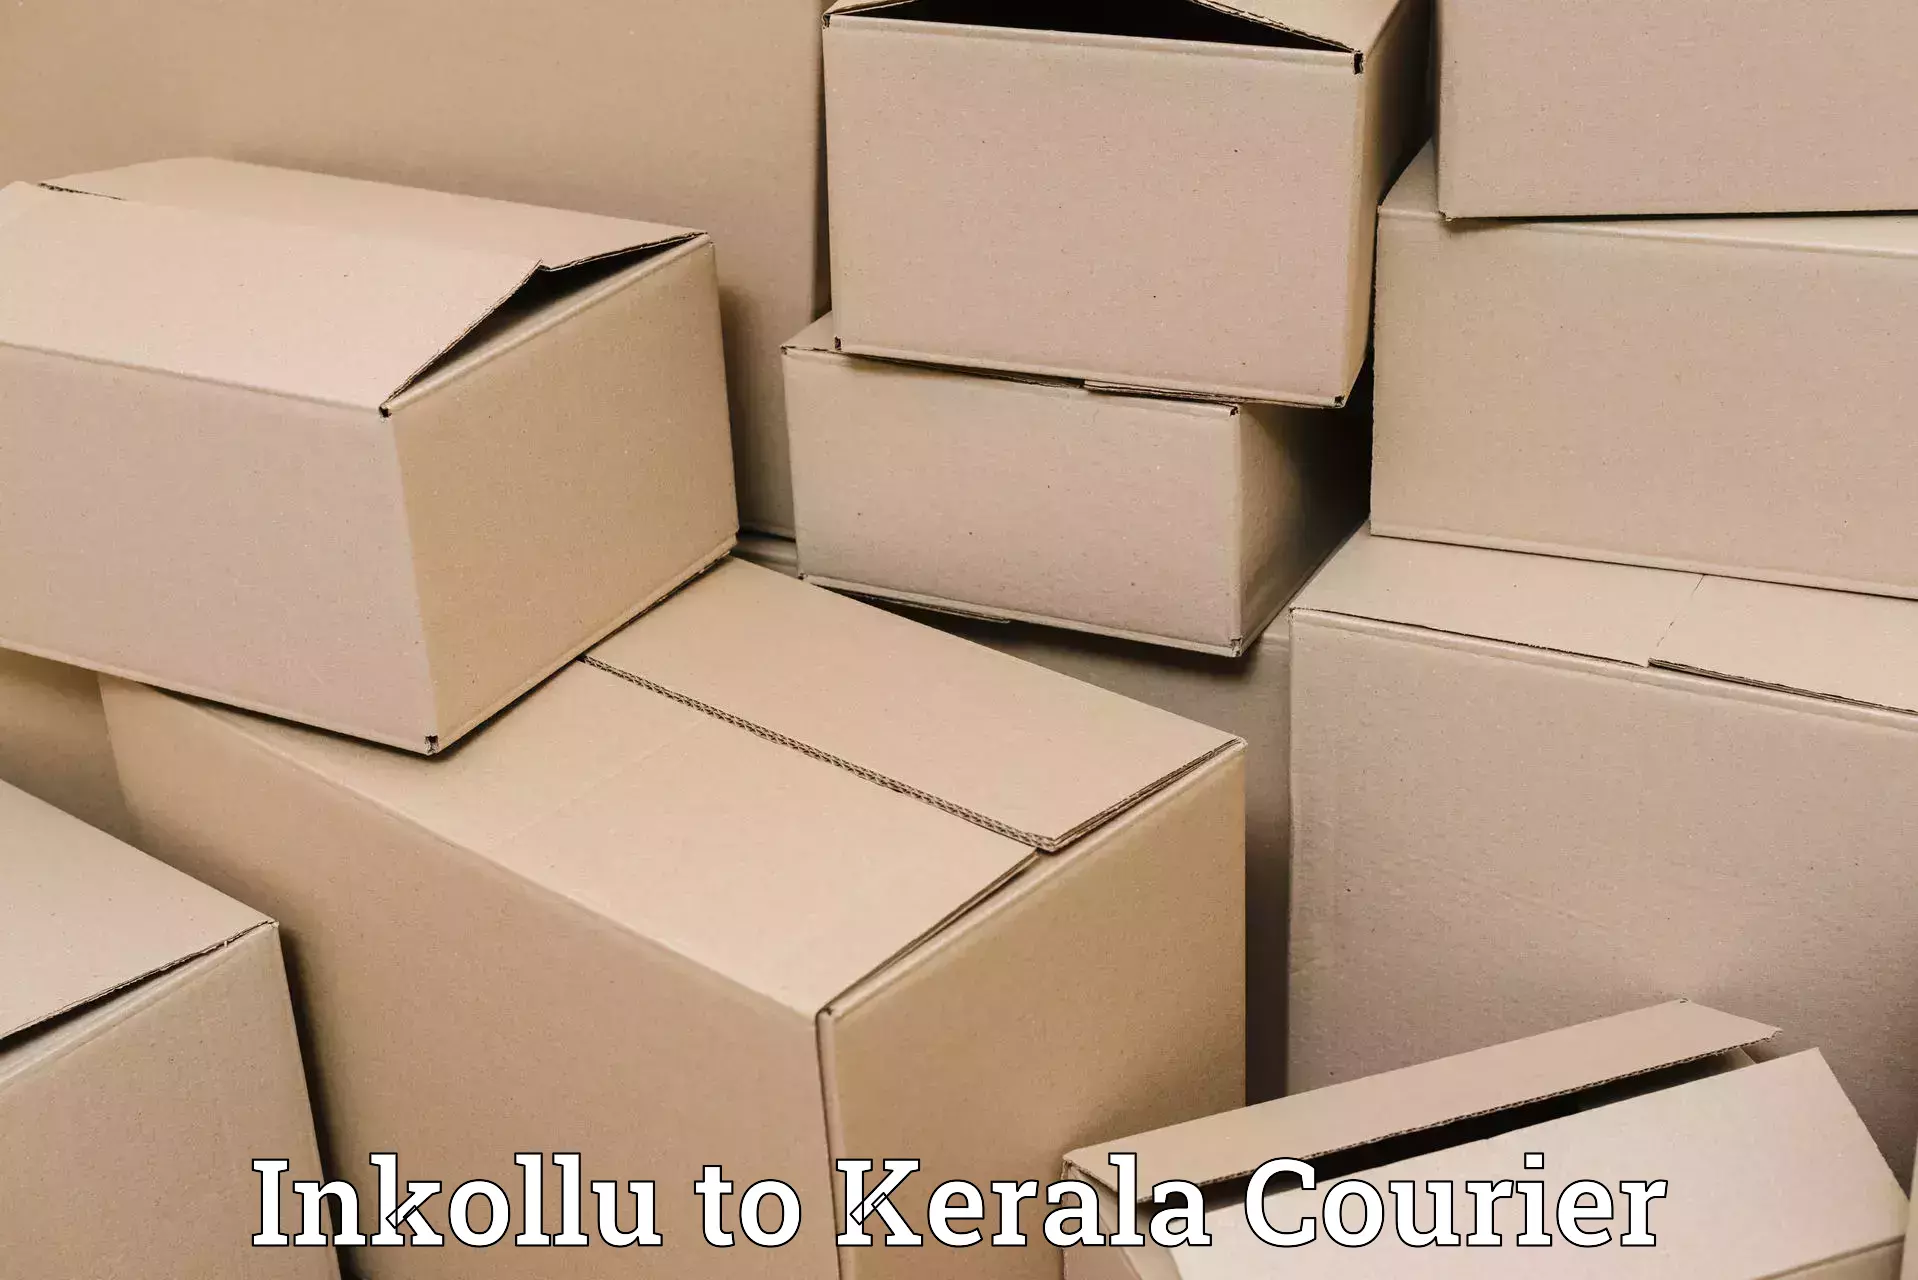 Parcel delivery automation Inkollu to Kerala